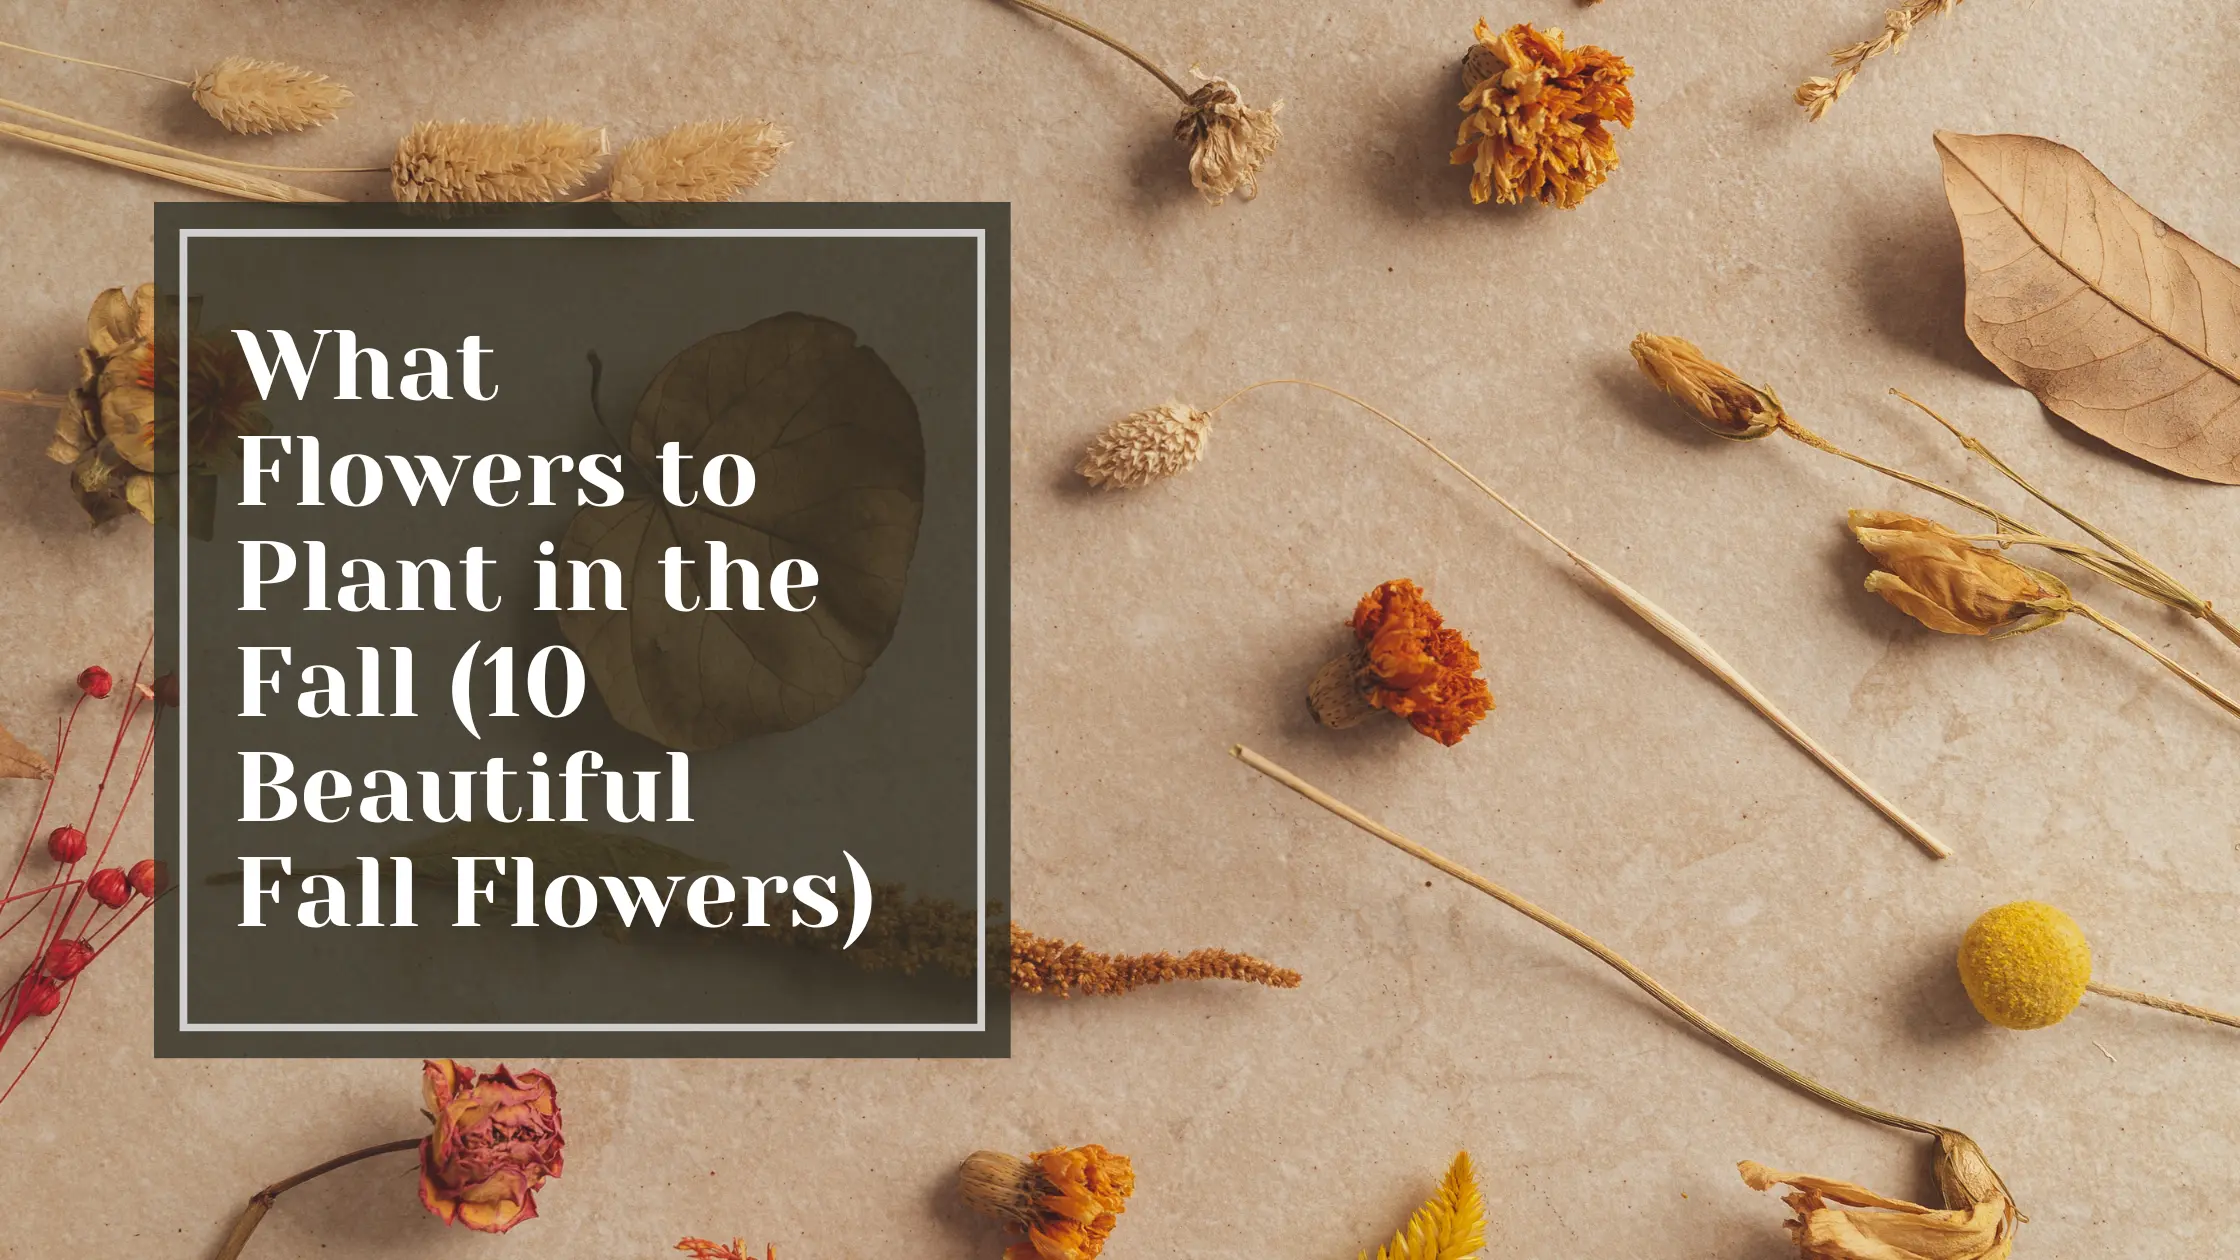 What Flowers to Plant in the Fall (10 Beautiful Fall Flowers)